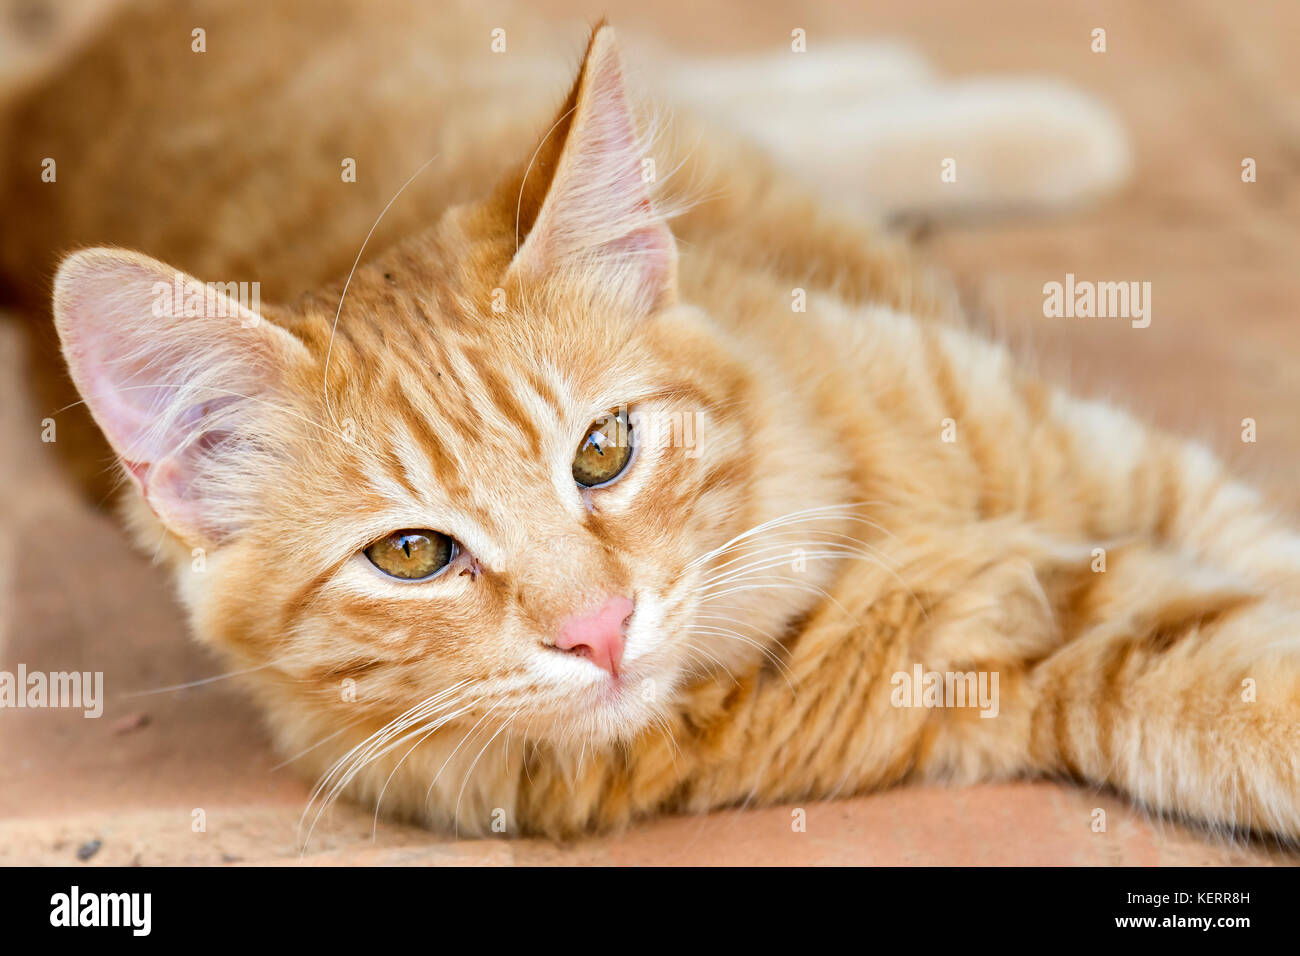 yellow stray kitty cat portrait laying on the floor Stock Photo